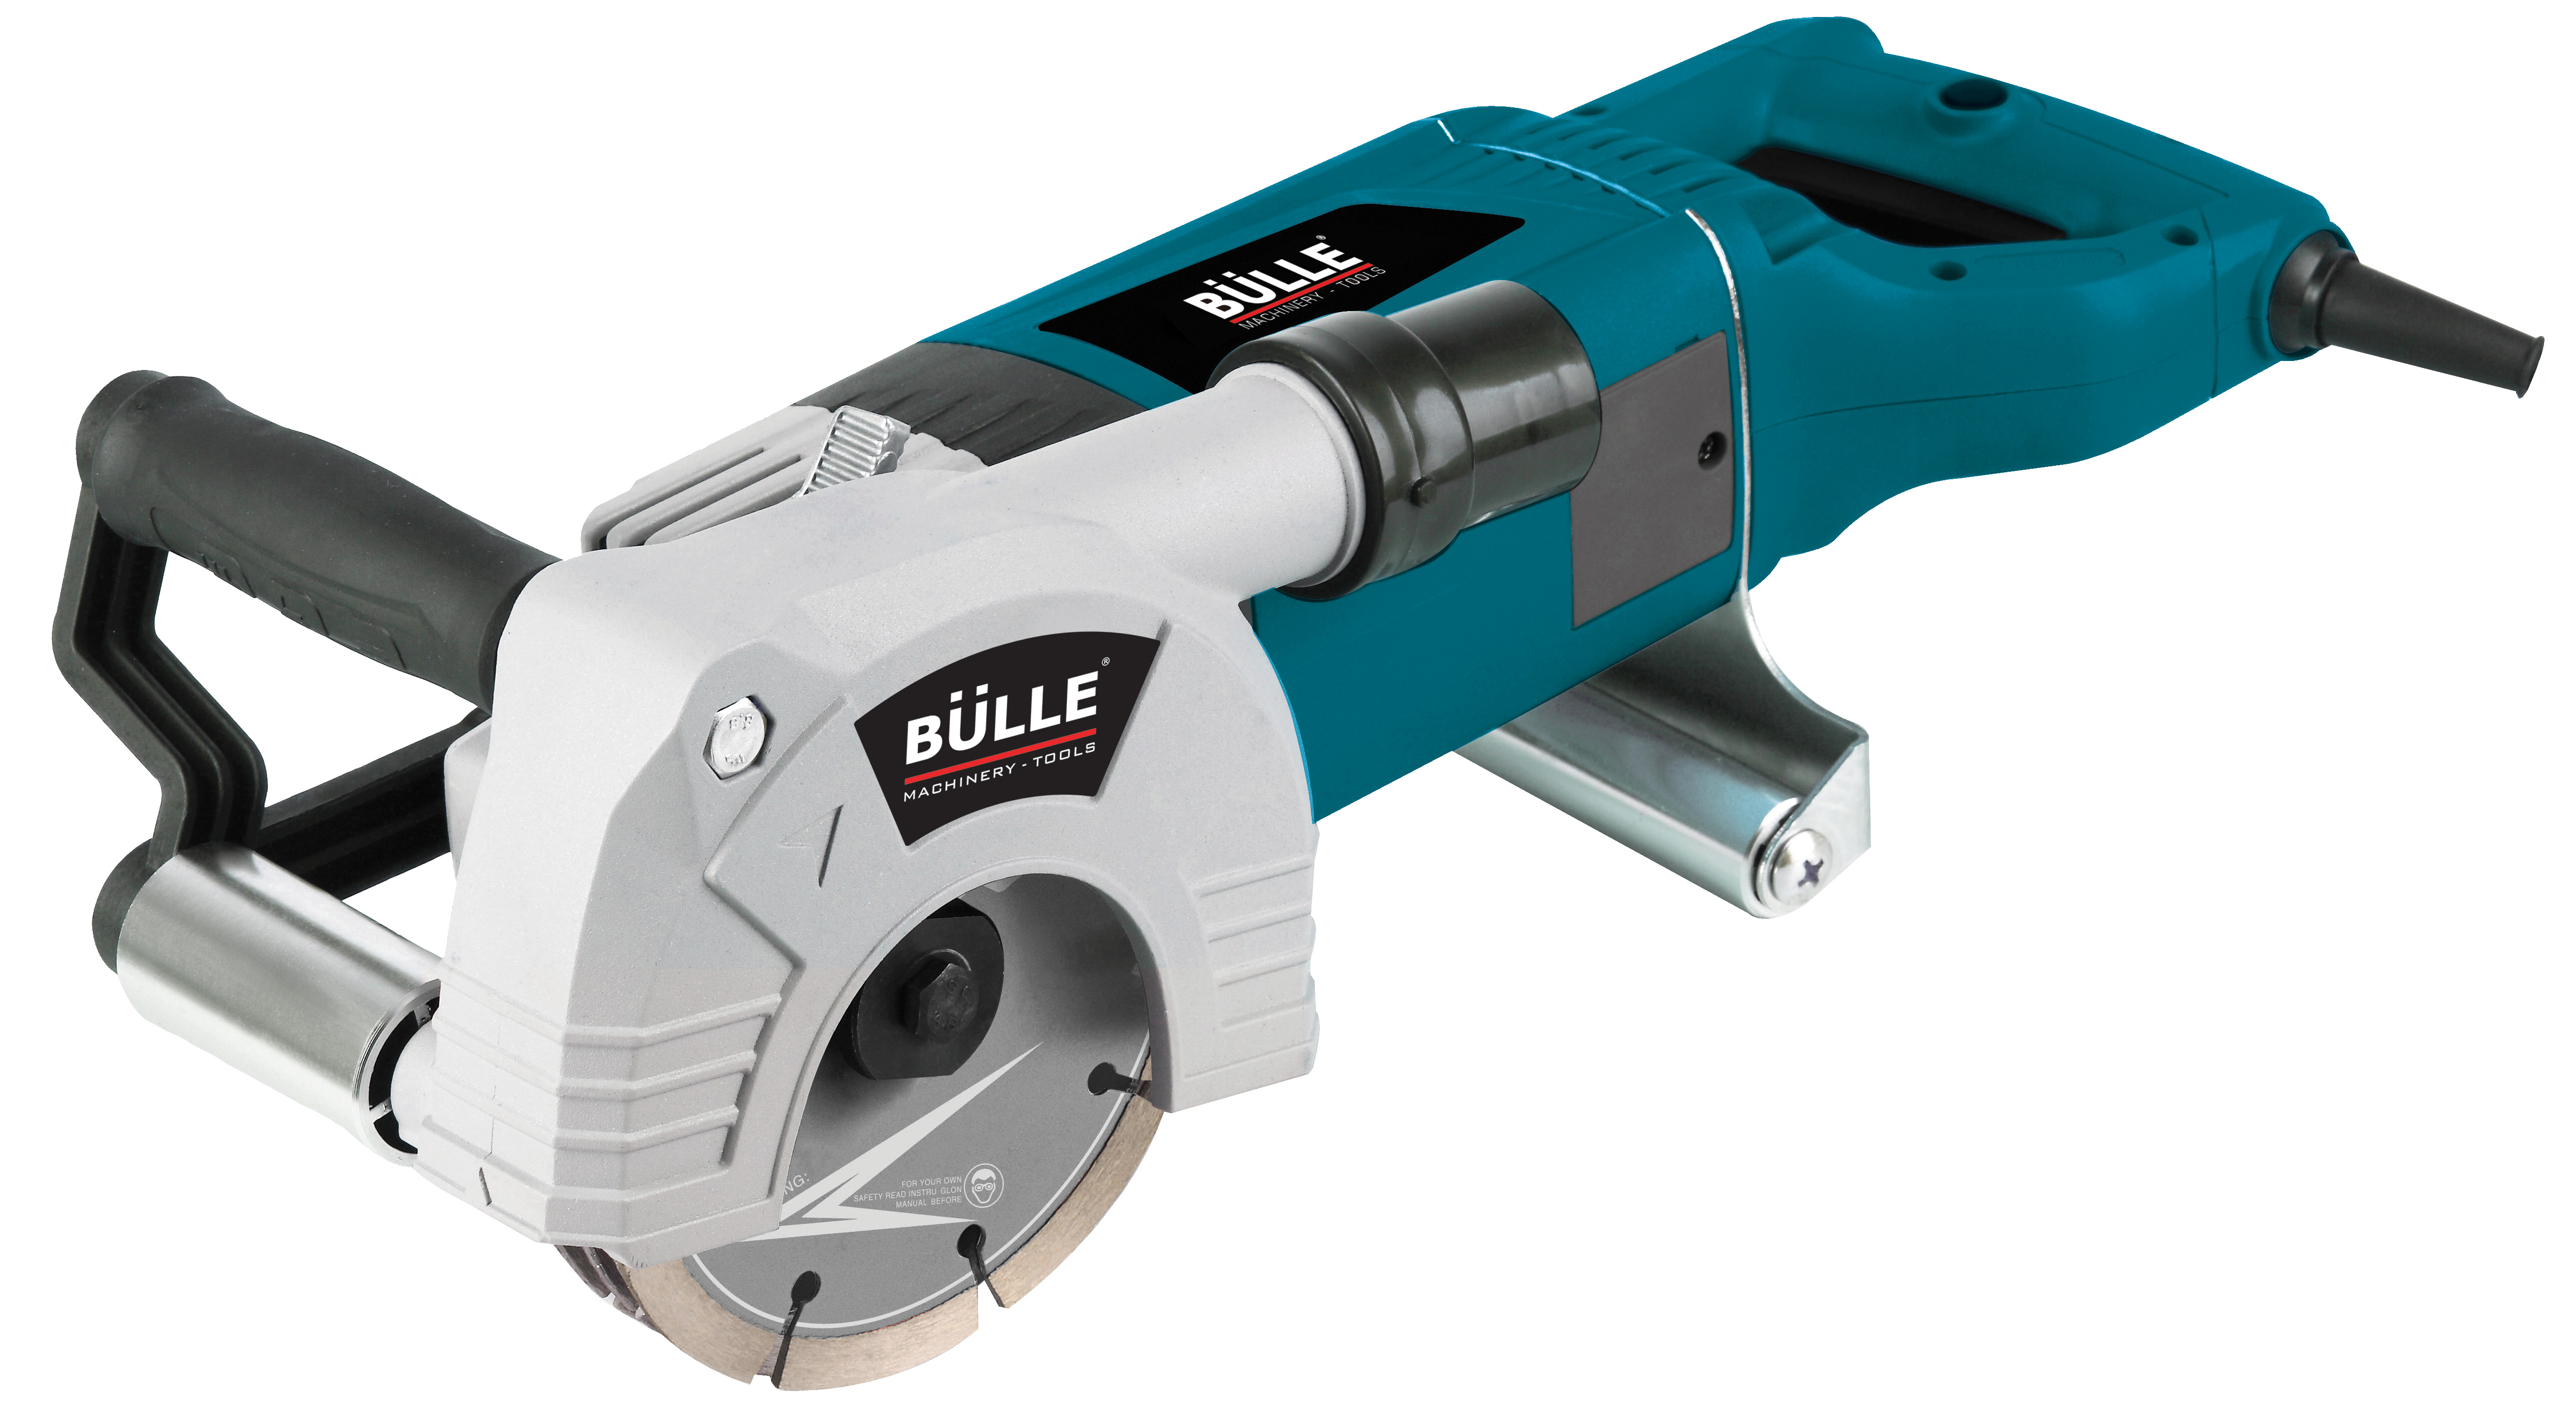 Electric Groove Cutter 1400W Bulle